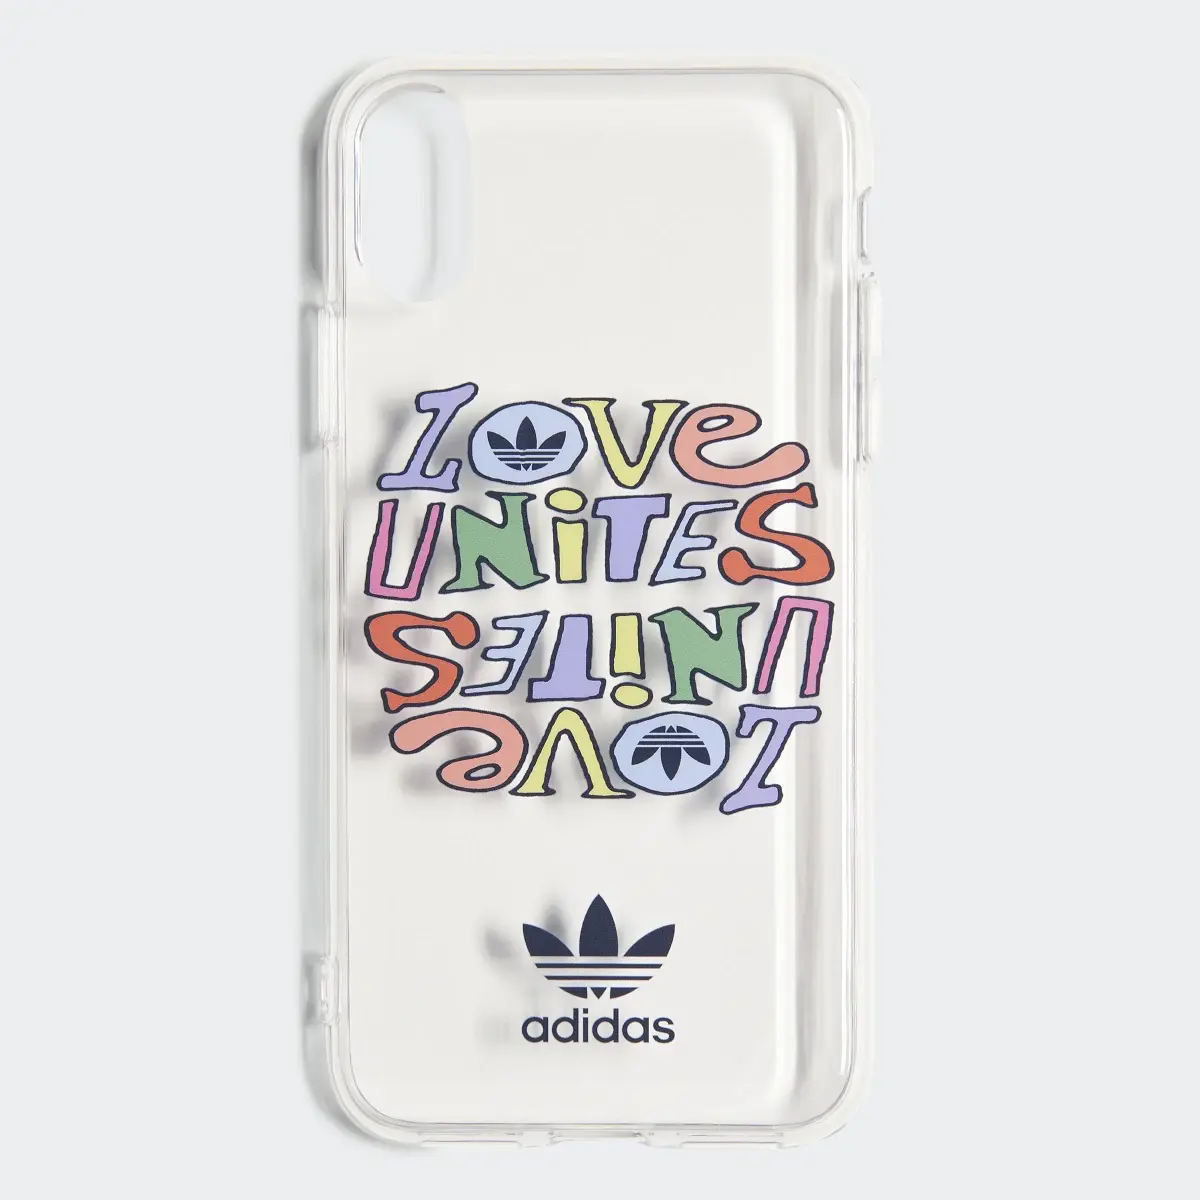 Adidas Pride Allover Print iPhone X/Xs Snap Case. 2